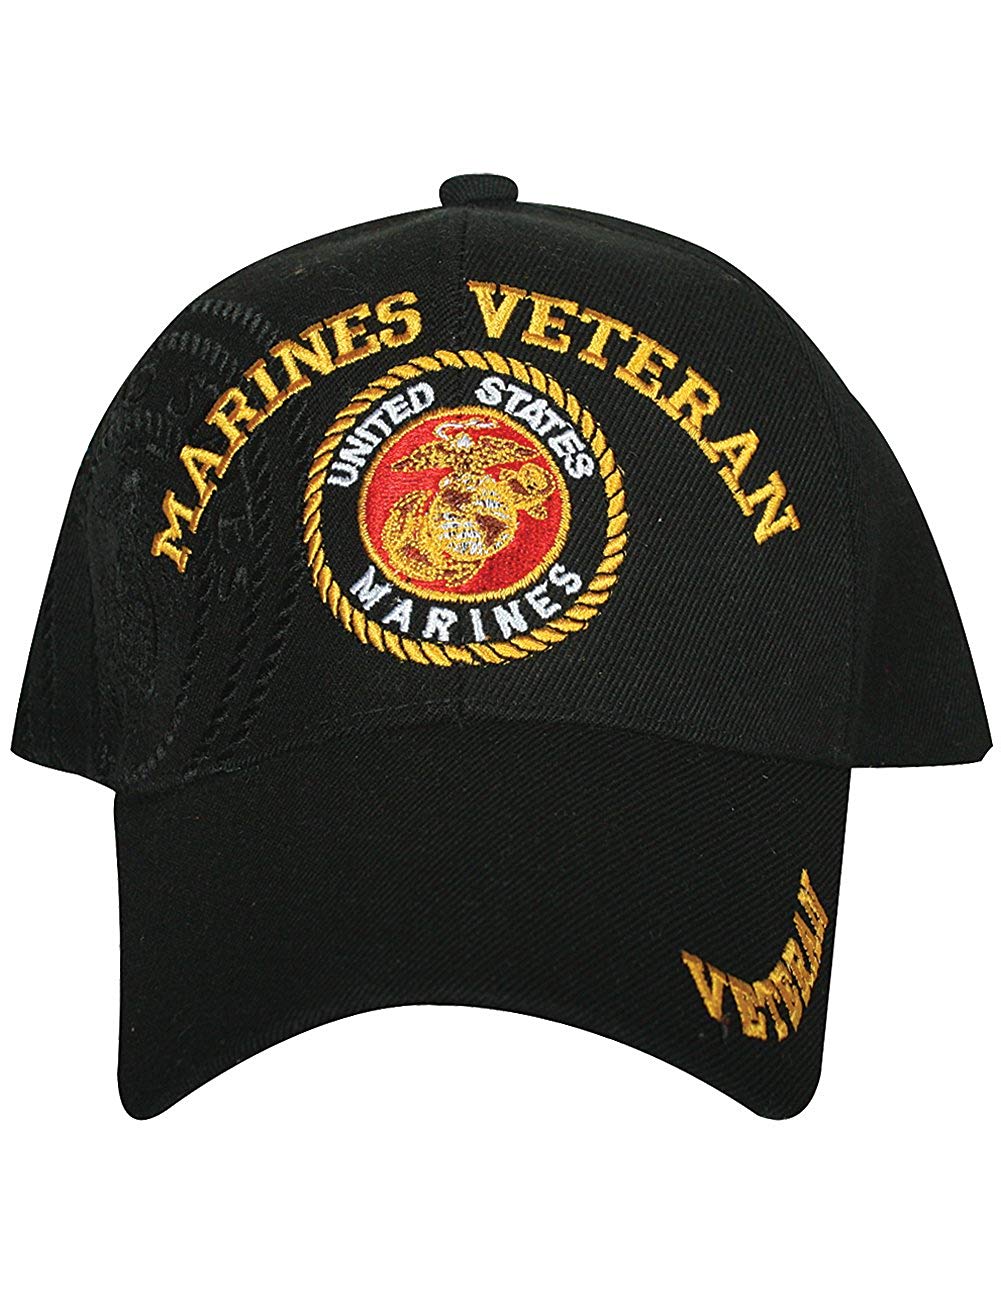 Military Branch Logo - Fox Outdoor US Marines USMC Veteran Embroidered Military